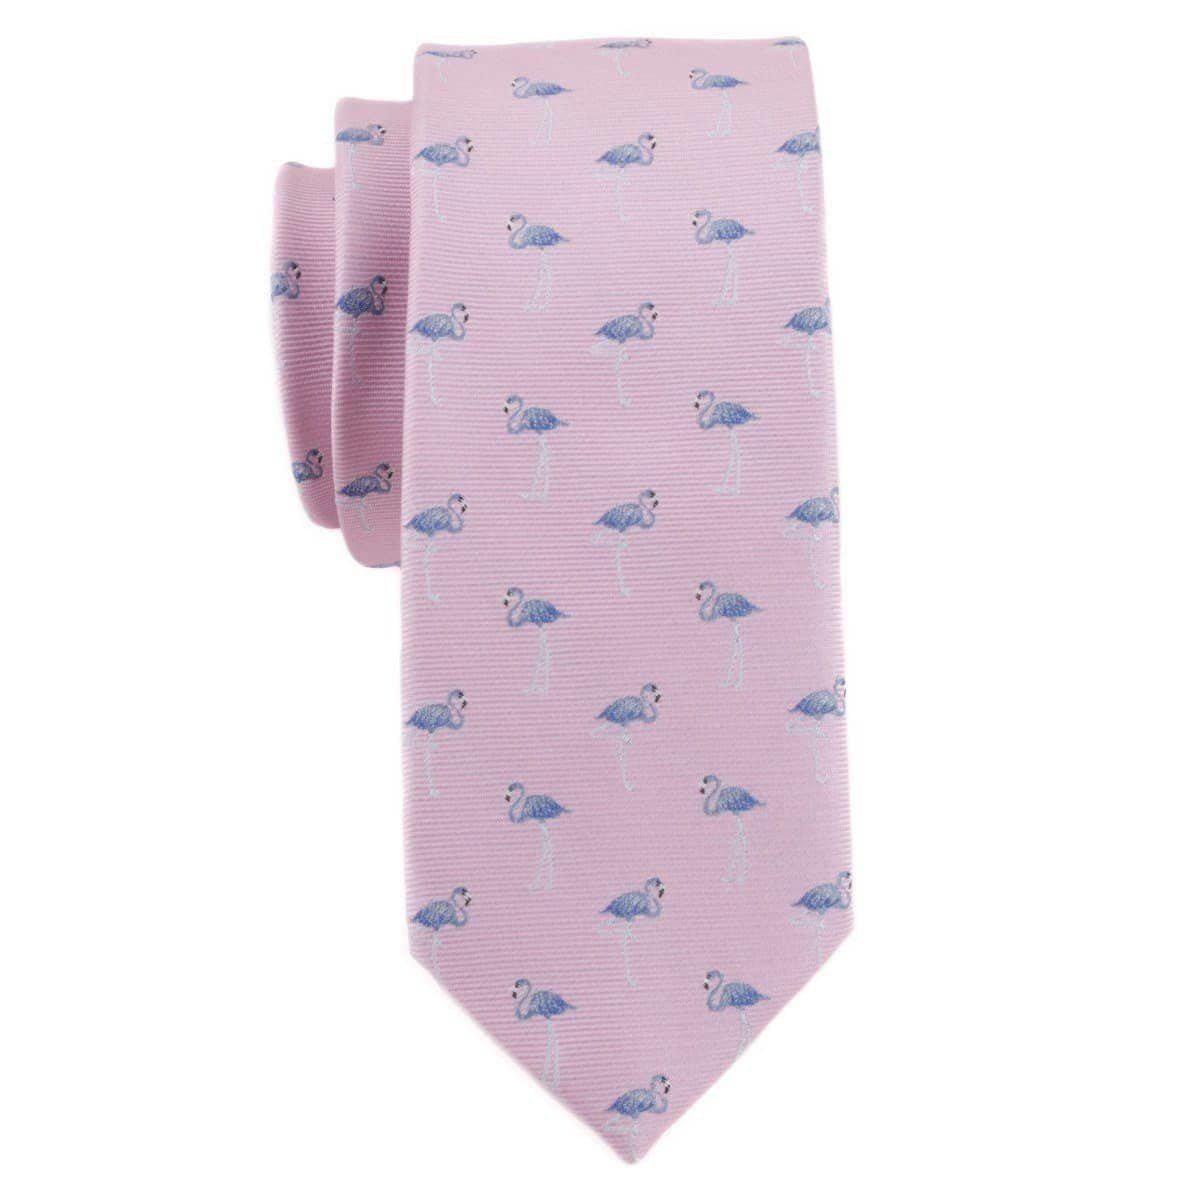 Flamingo Skinny Tie 2.36 LEAH-Neckties-Flamingo Skinny Tie Men’s Floral Necktie for weddings and events, great for prom and anniversary gifts. Mens floral ties near me us ties-Mytieshop. Skinny ties for weddings anniversaries. Father of bride. Groomsmen. Cool skinny neckties for men. Neckwear for prom, missions and fancy events. Gift ideas for men. Anniversaries ideas. Wedding aesthetics. Flower ties. Dry flower ties.